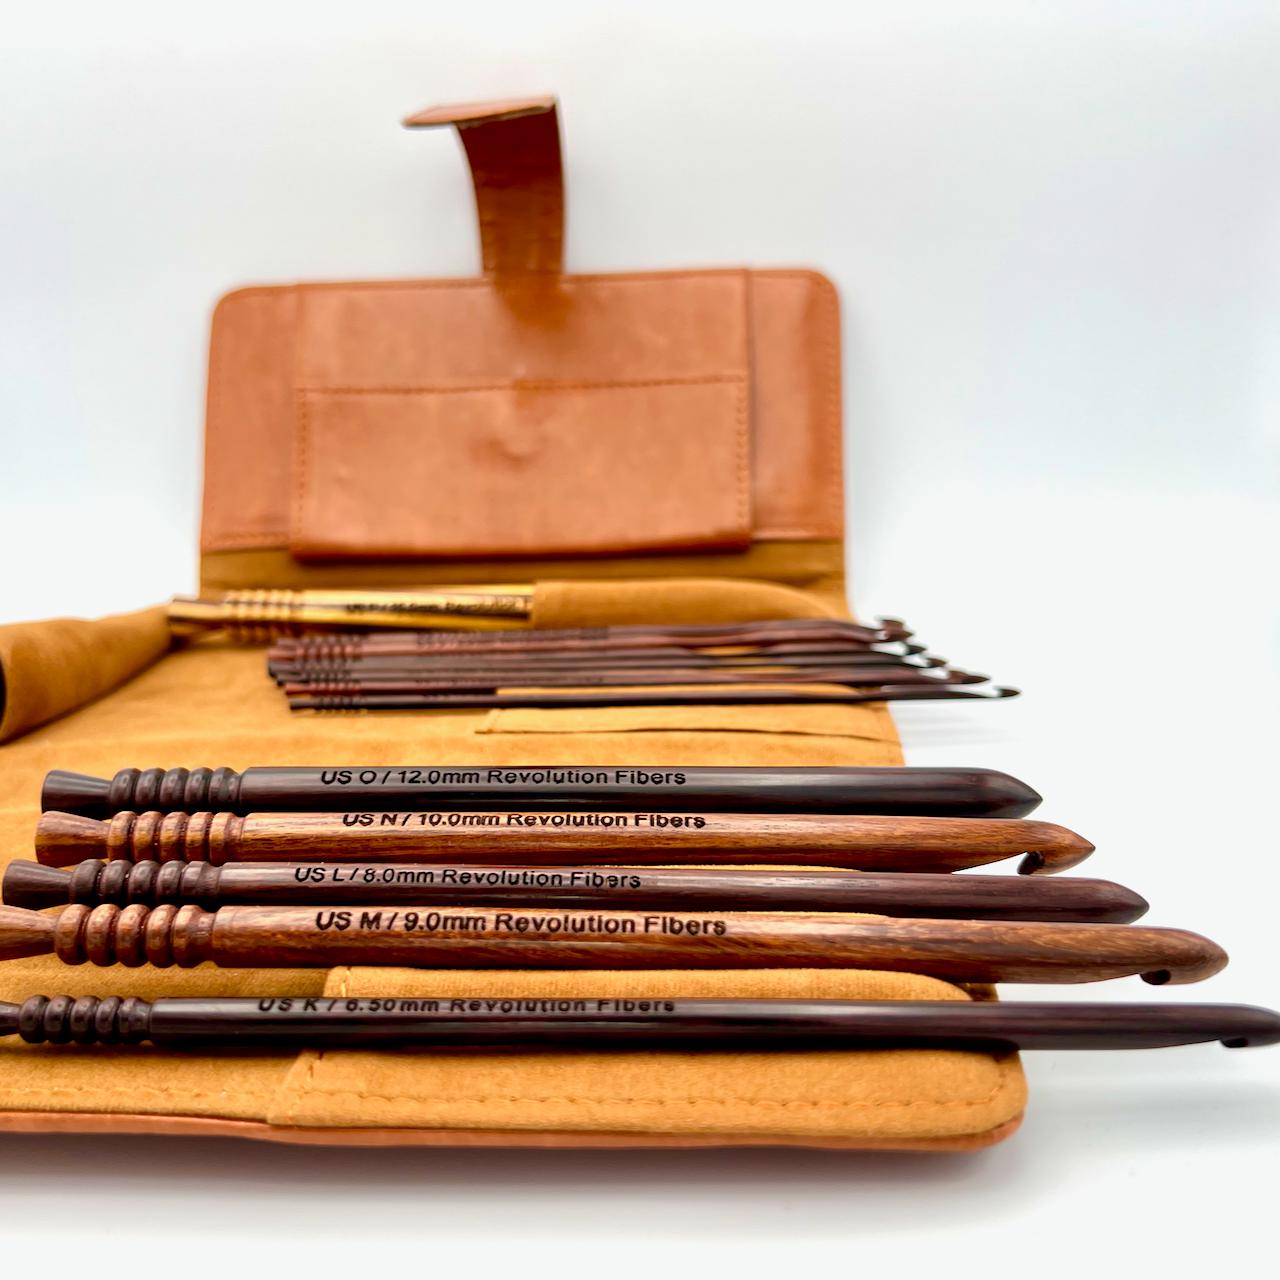 Wood Carving International-Rosewood Set of 13 Crochet Hooks,Wooden Crochet  Hooks Set for Knitting and Crocheting,Length: 6.5 Inches,Hook Size from 4